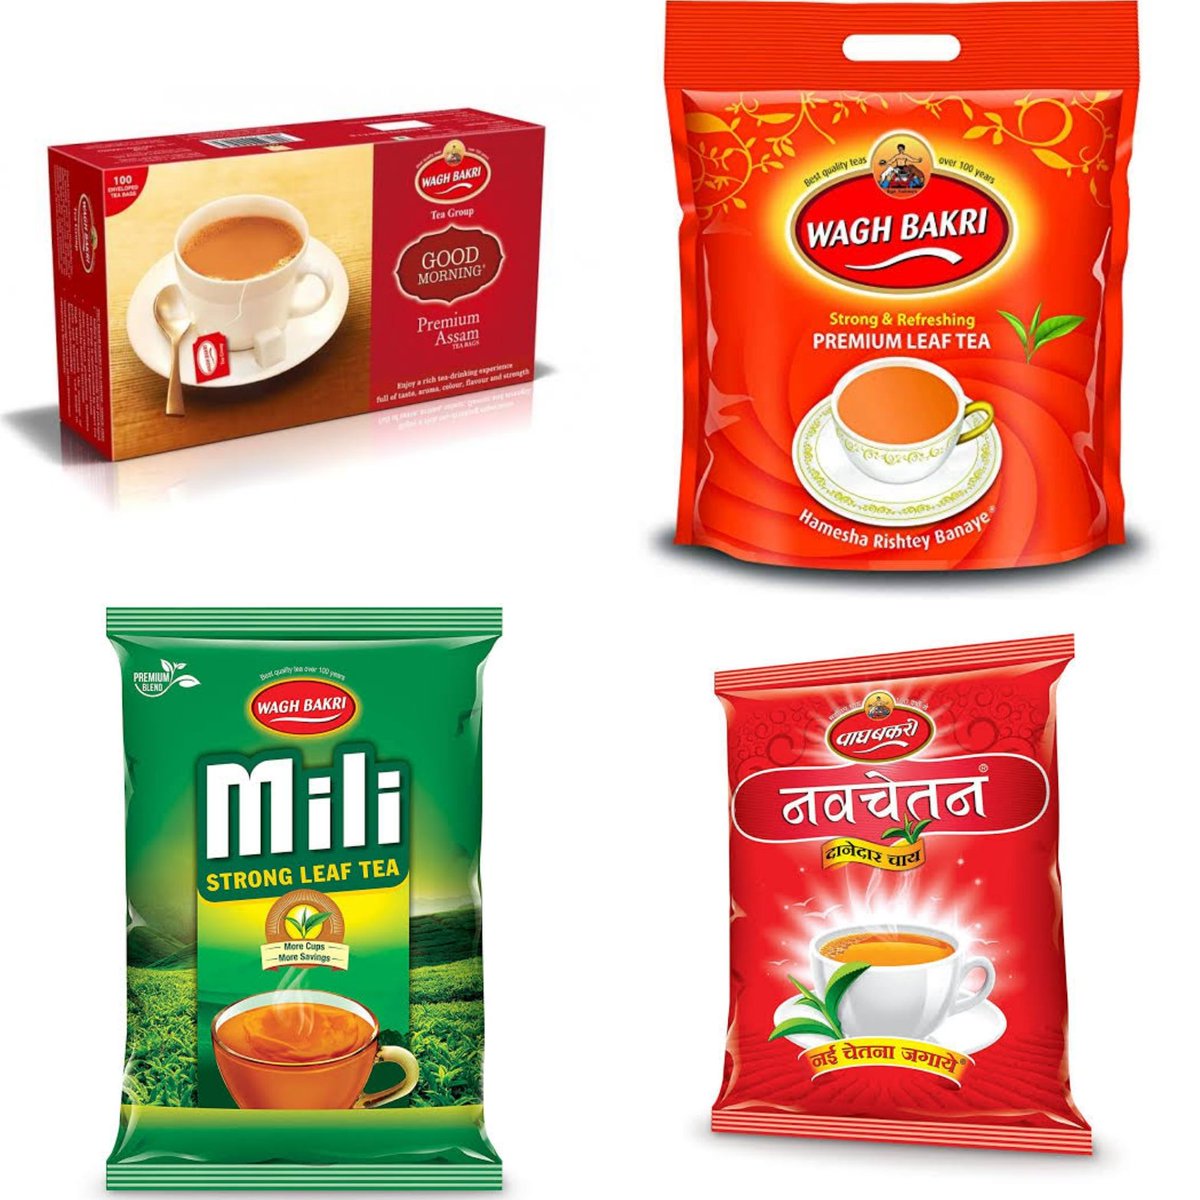 Mili Tea: This product is positioned for the middle and lower tier segments. It accounts for 20% of the revenue of the company.Navchetan Tea: This is aimed at the economy segment and is positioned against the non-branded tea in the market.12/